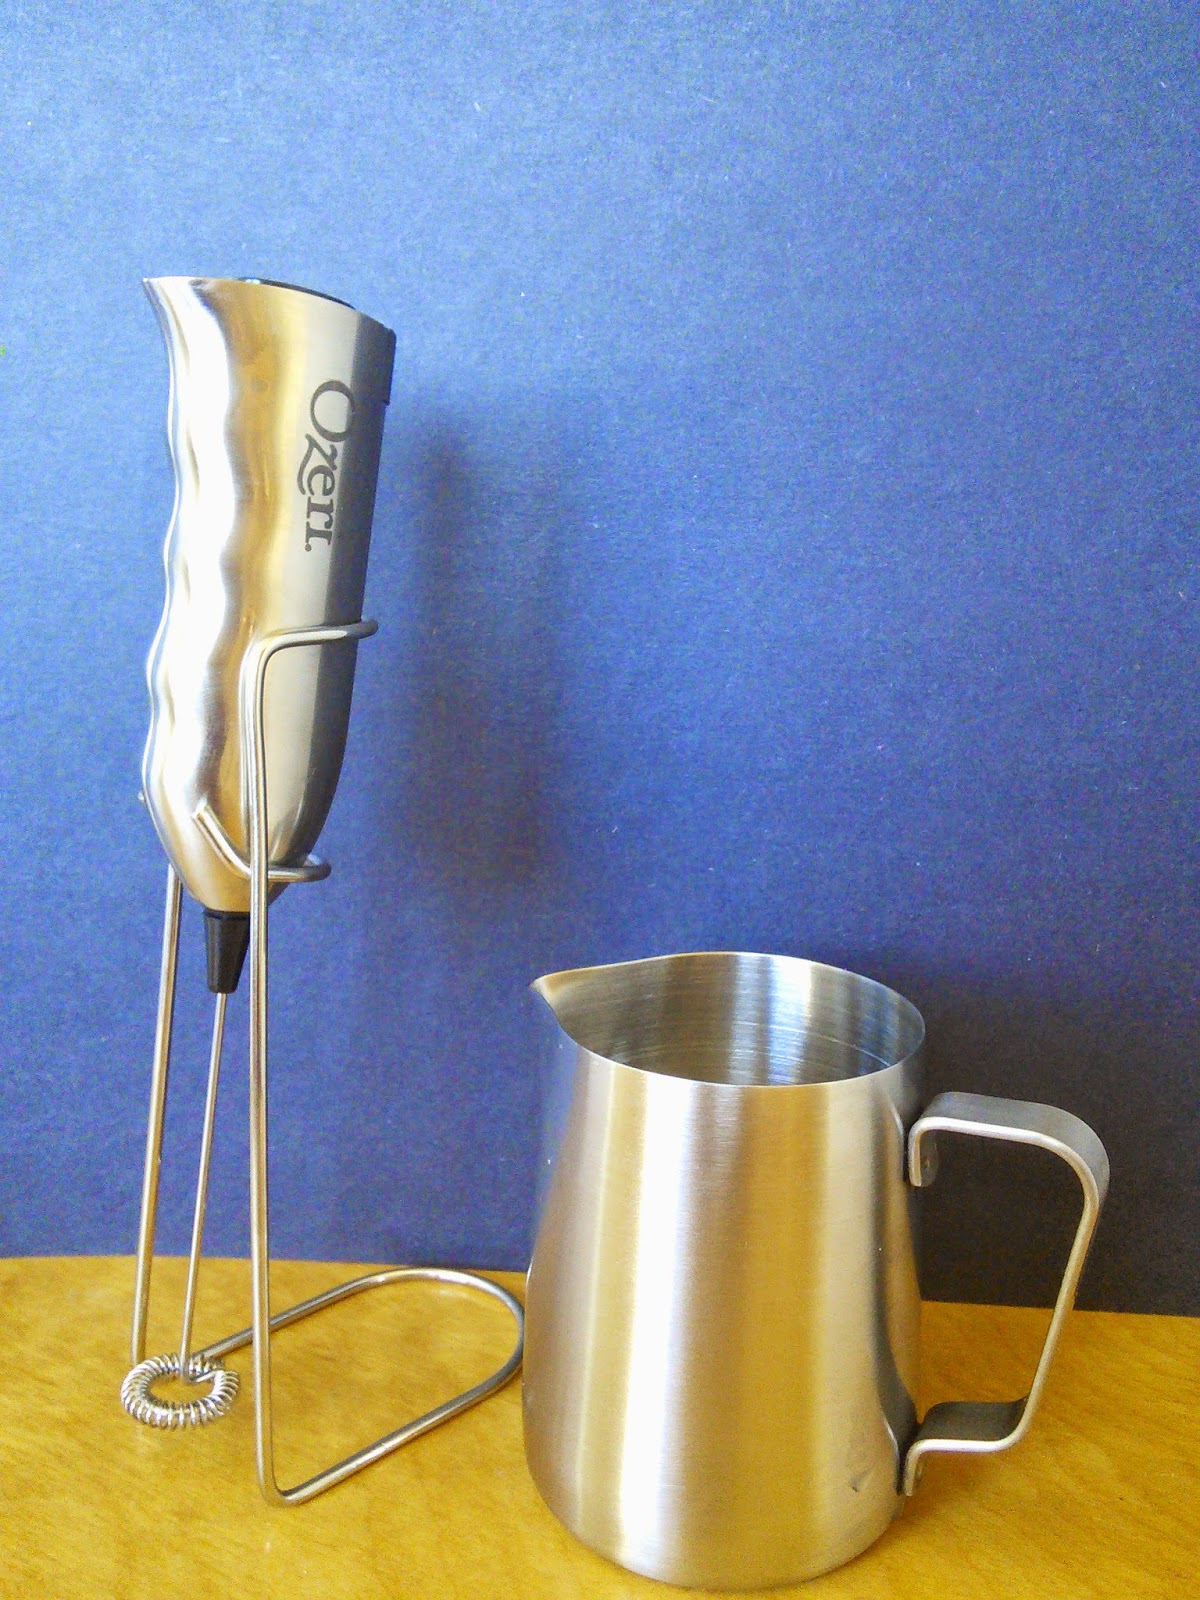 Ozeri Deluxe Milk Frother in Stainless Steel with Stand and 4 Frothing Attachments